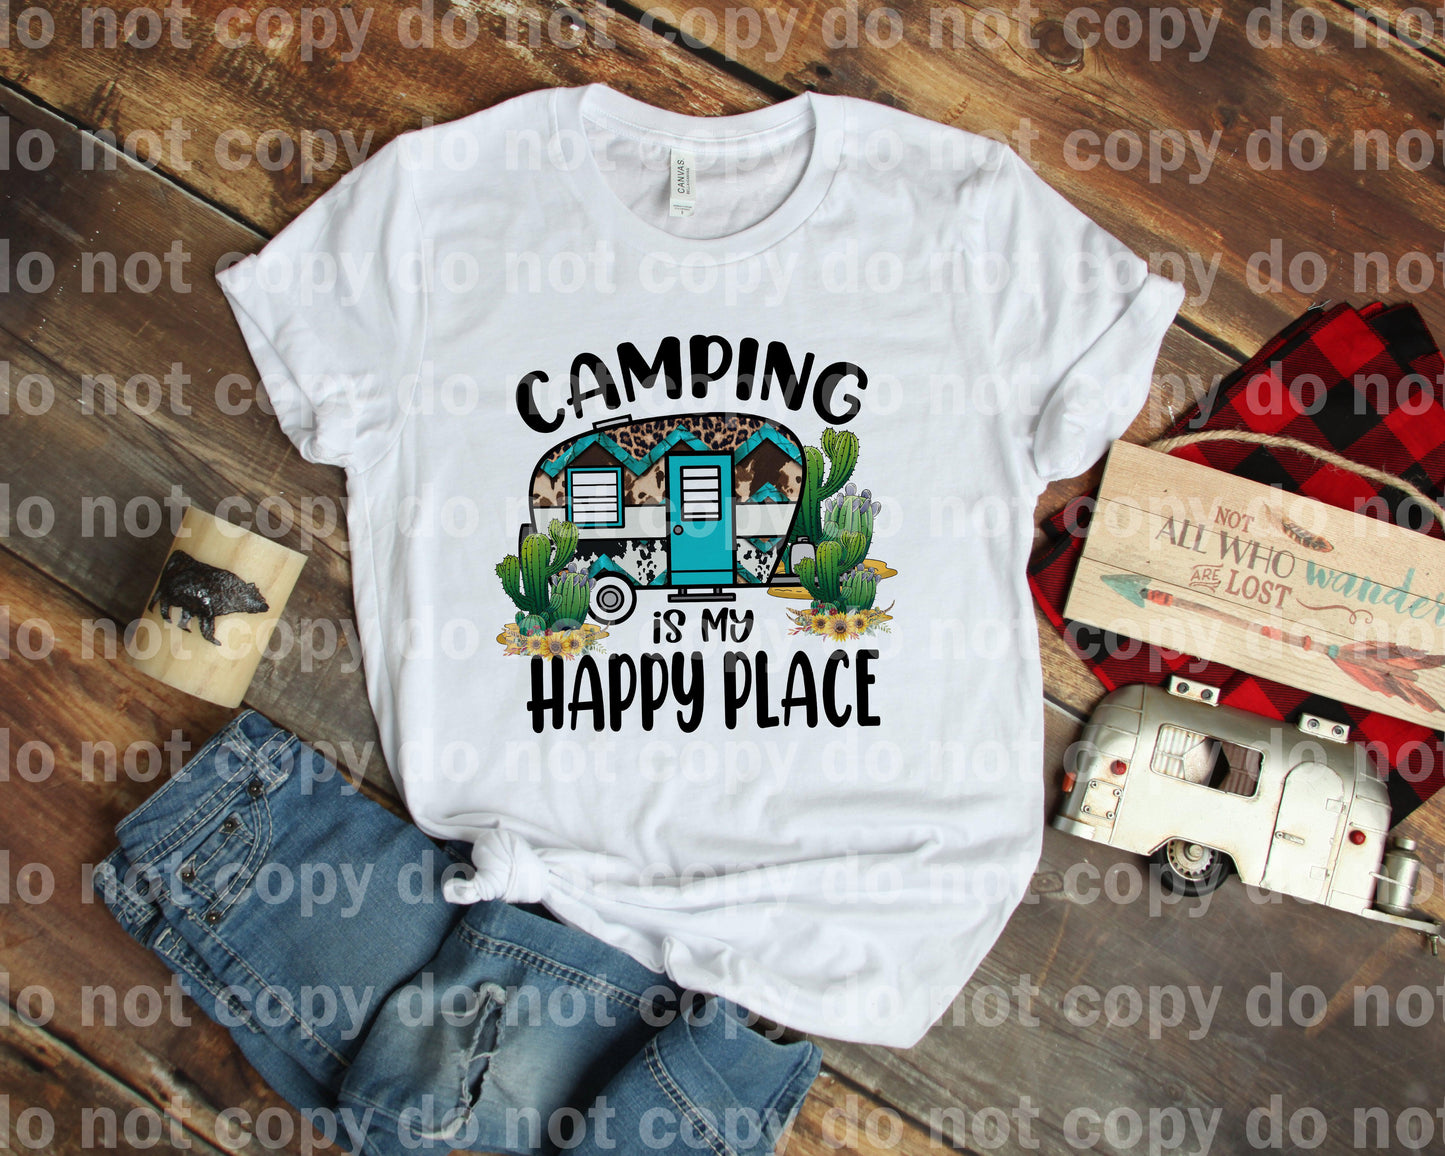 Camping is a Happy Place Dream Print or Sublimation Print